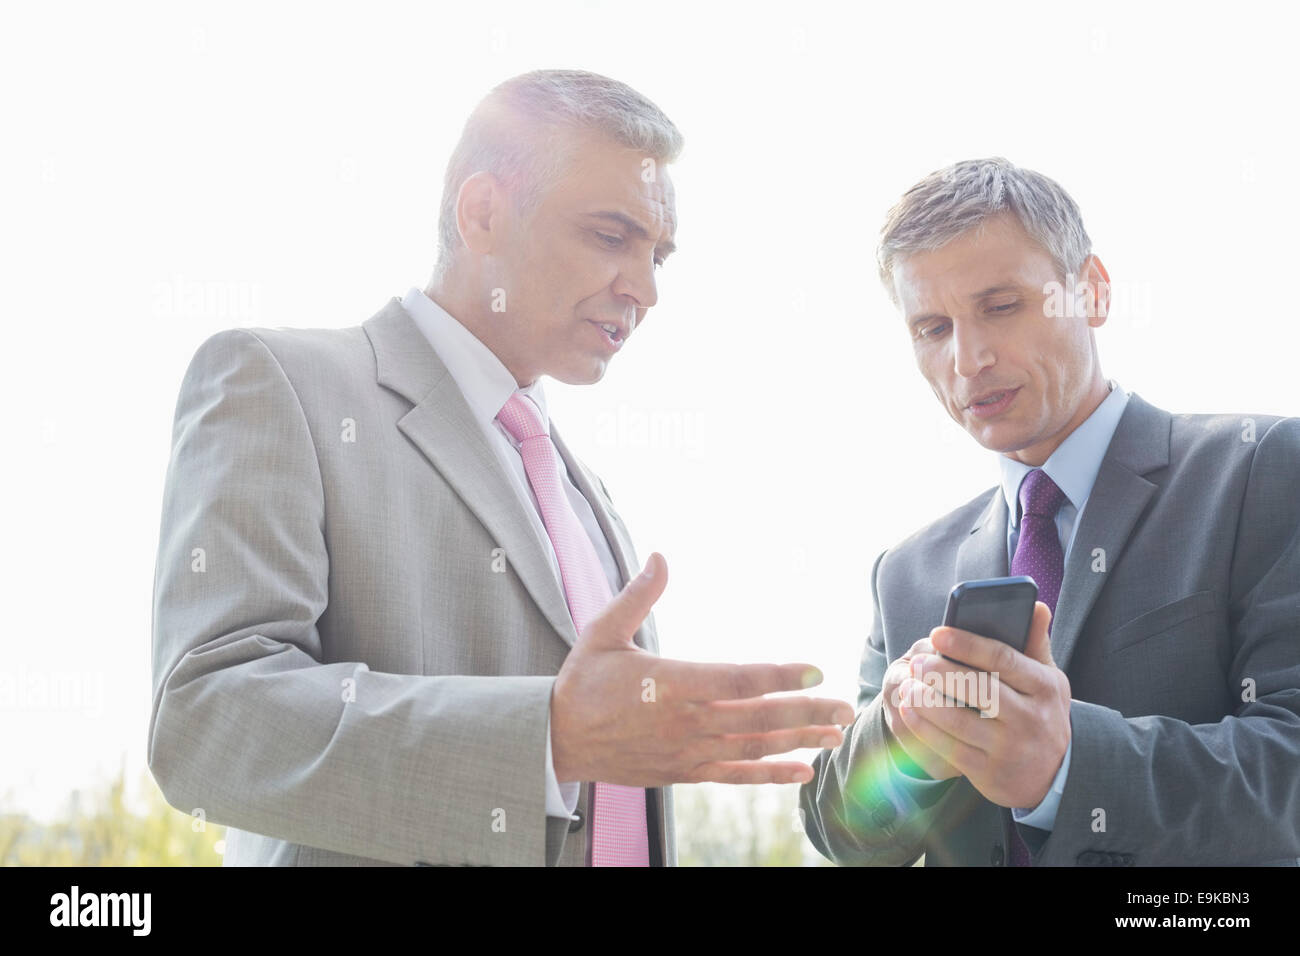 Businessmen discussing over mobile phone outdoors Stock Photo